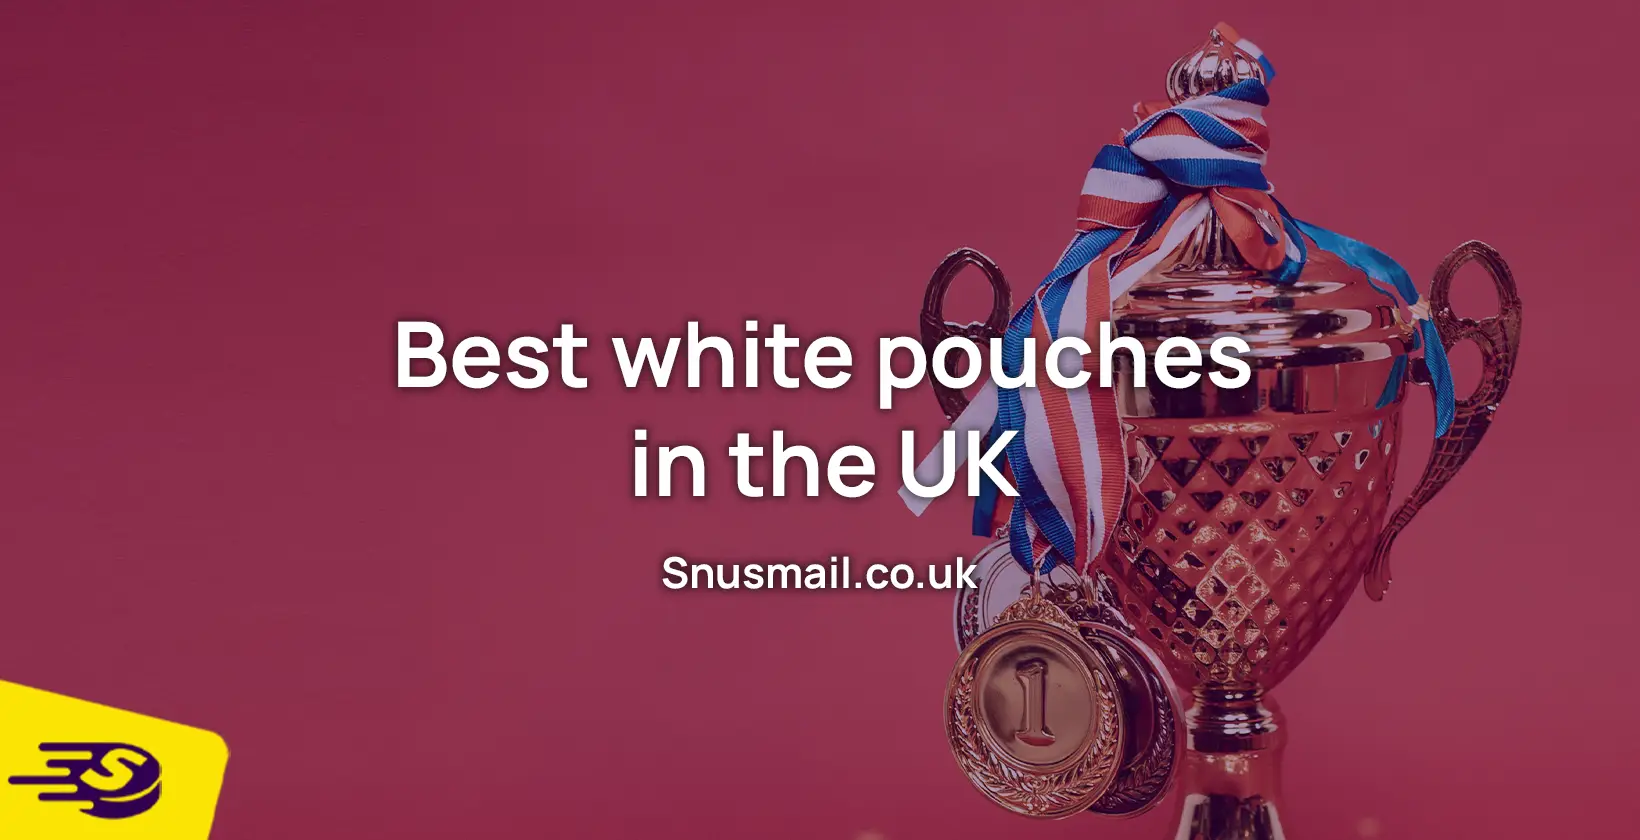 Best white pouches in the uk